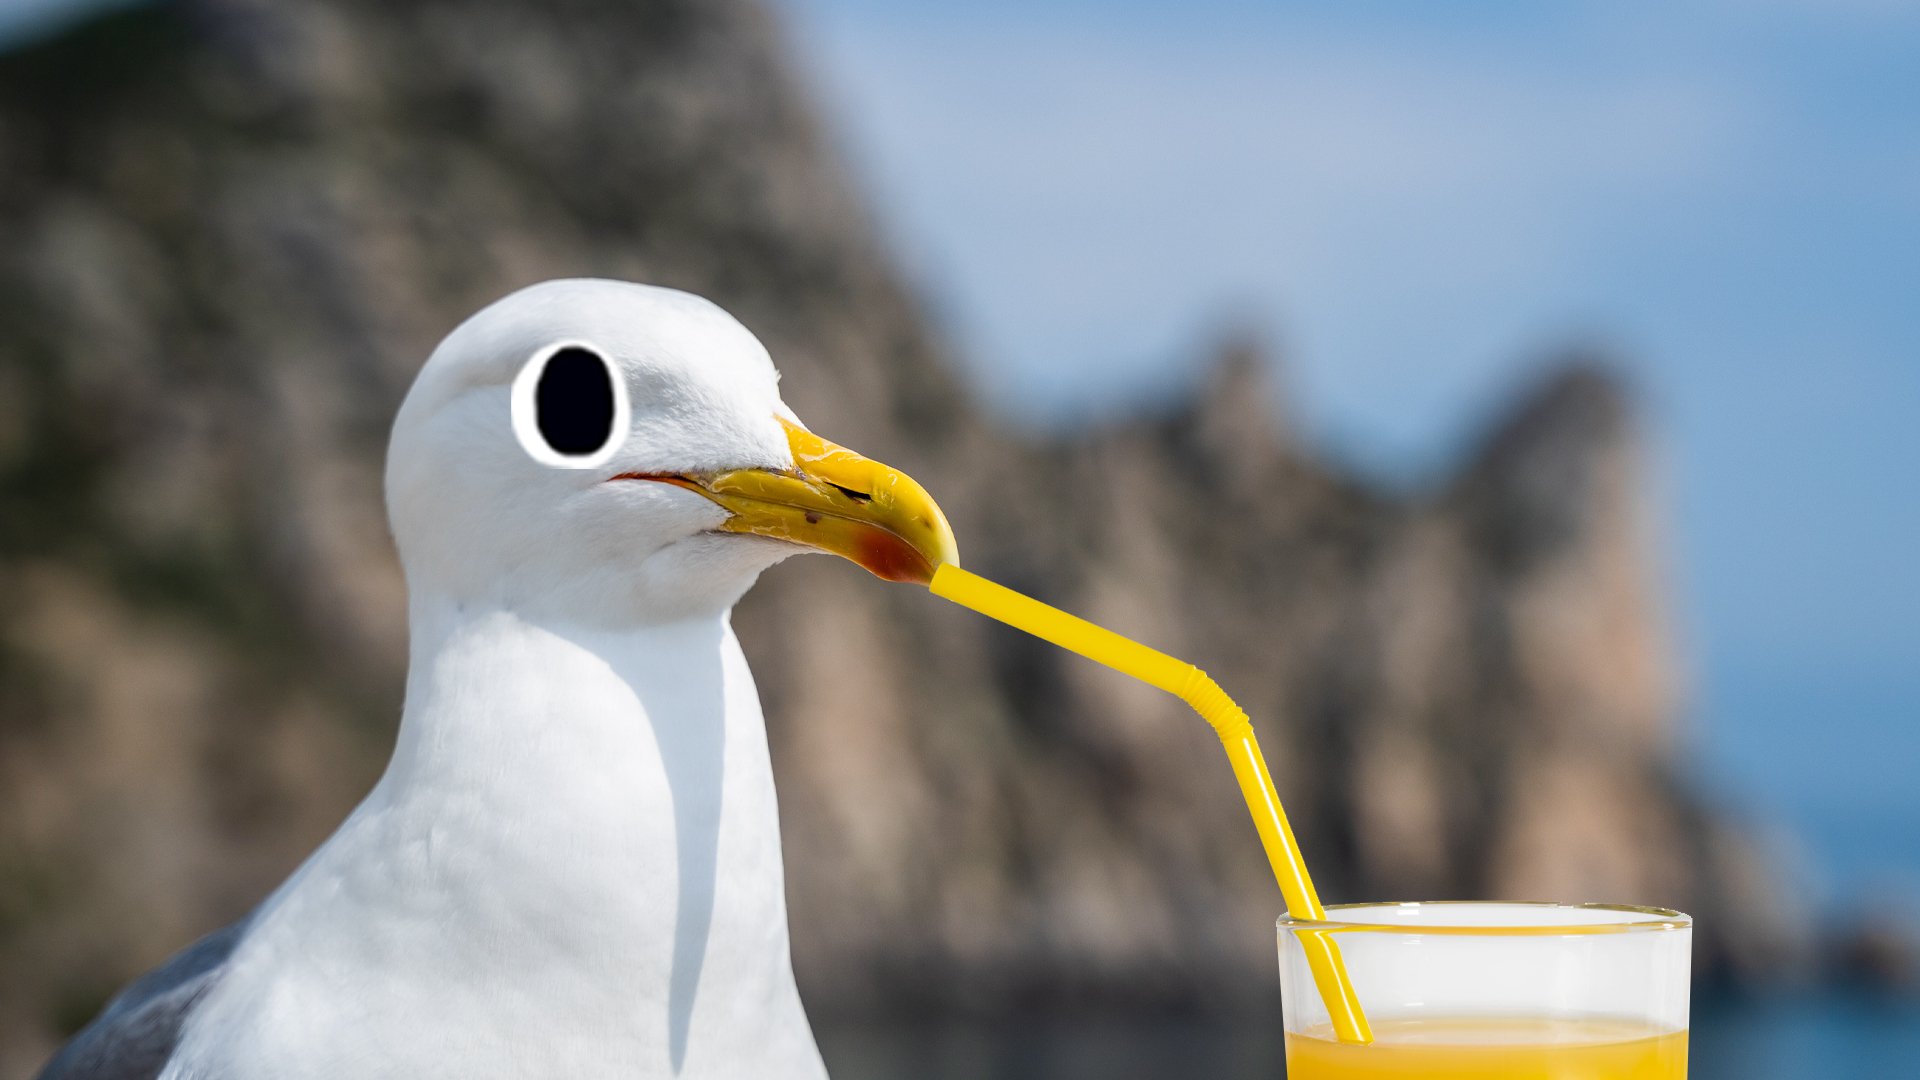 A seagull drinking from a glass, somehow